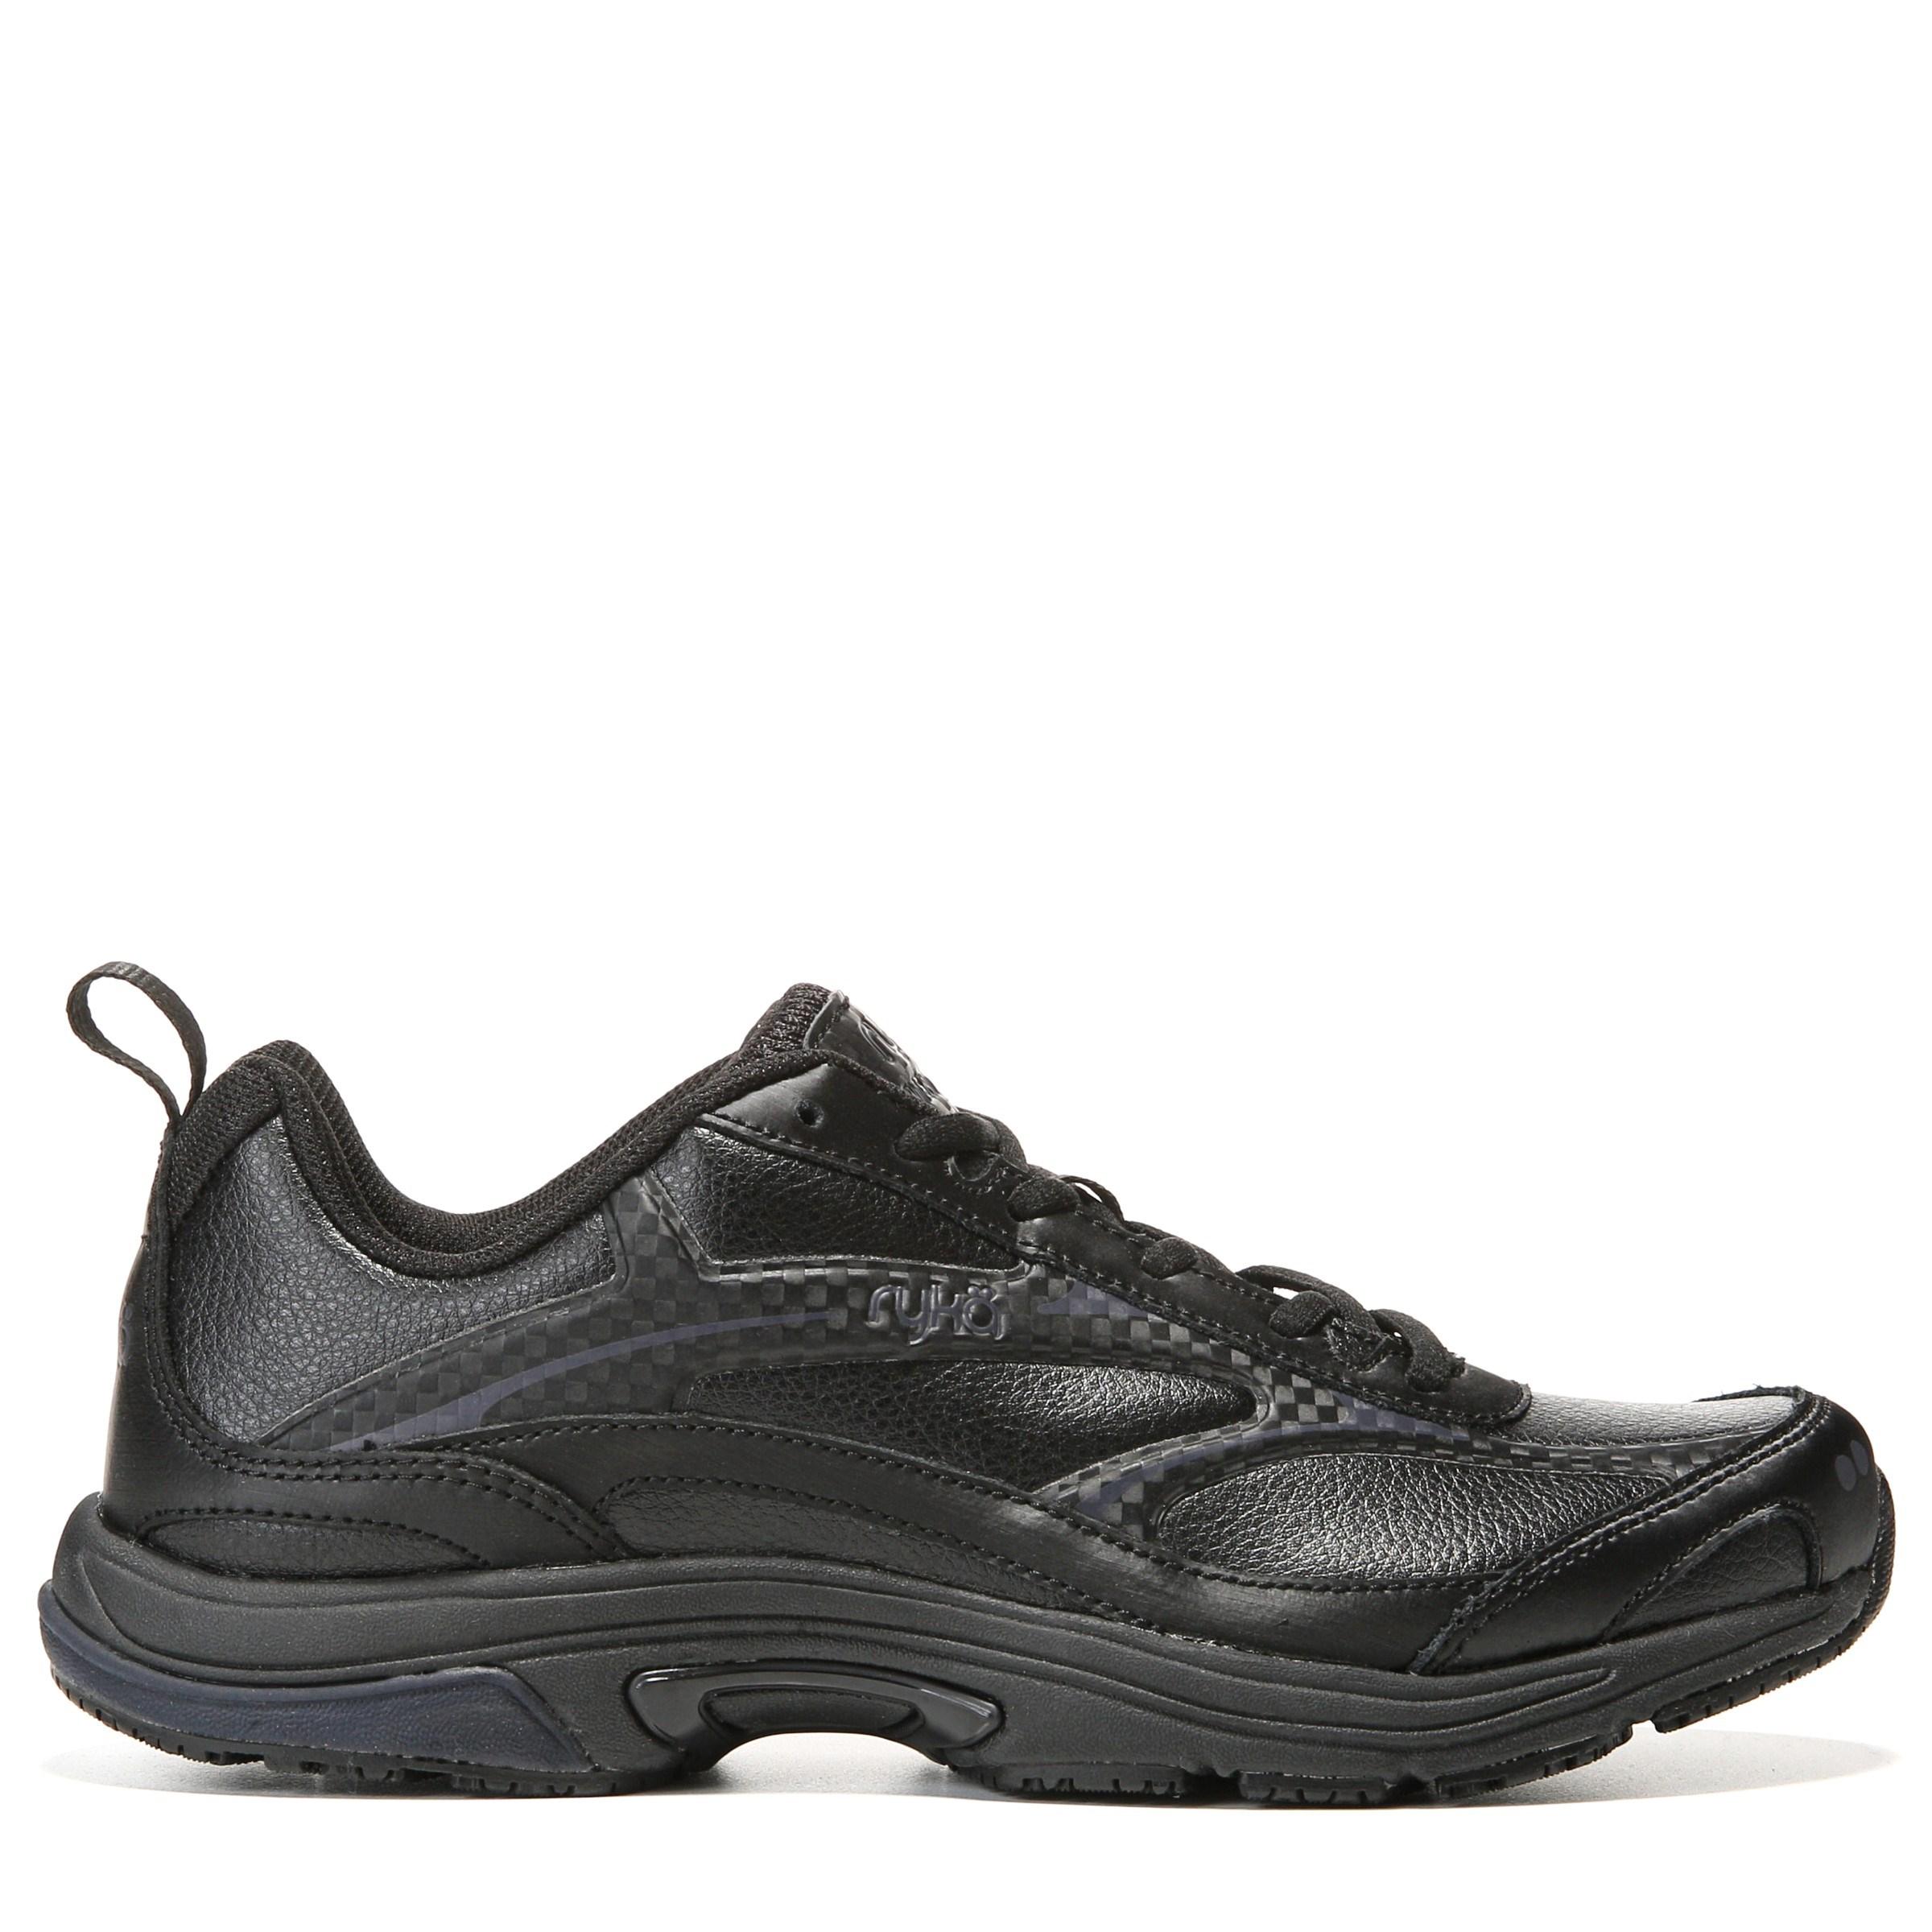 Ryka Leather Intent Xt 2 Slip Resistant Work Shoes in Black/Silver ...